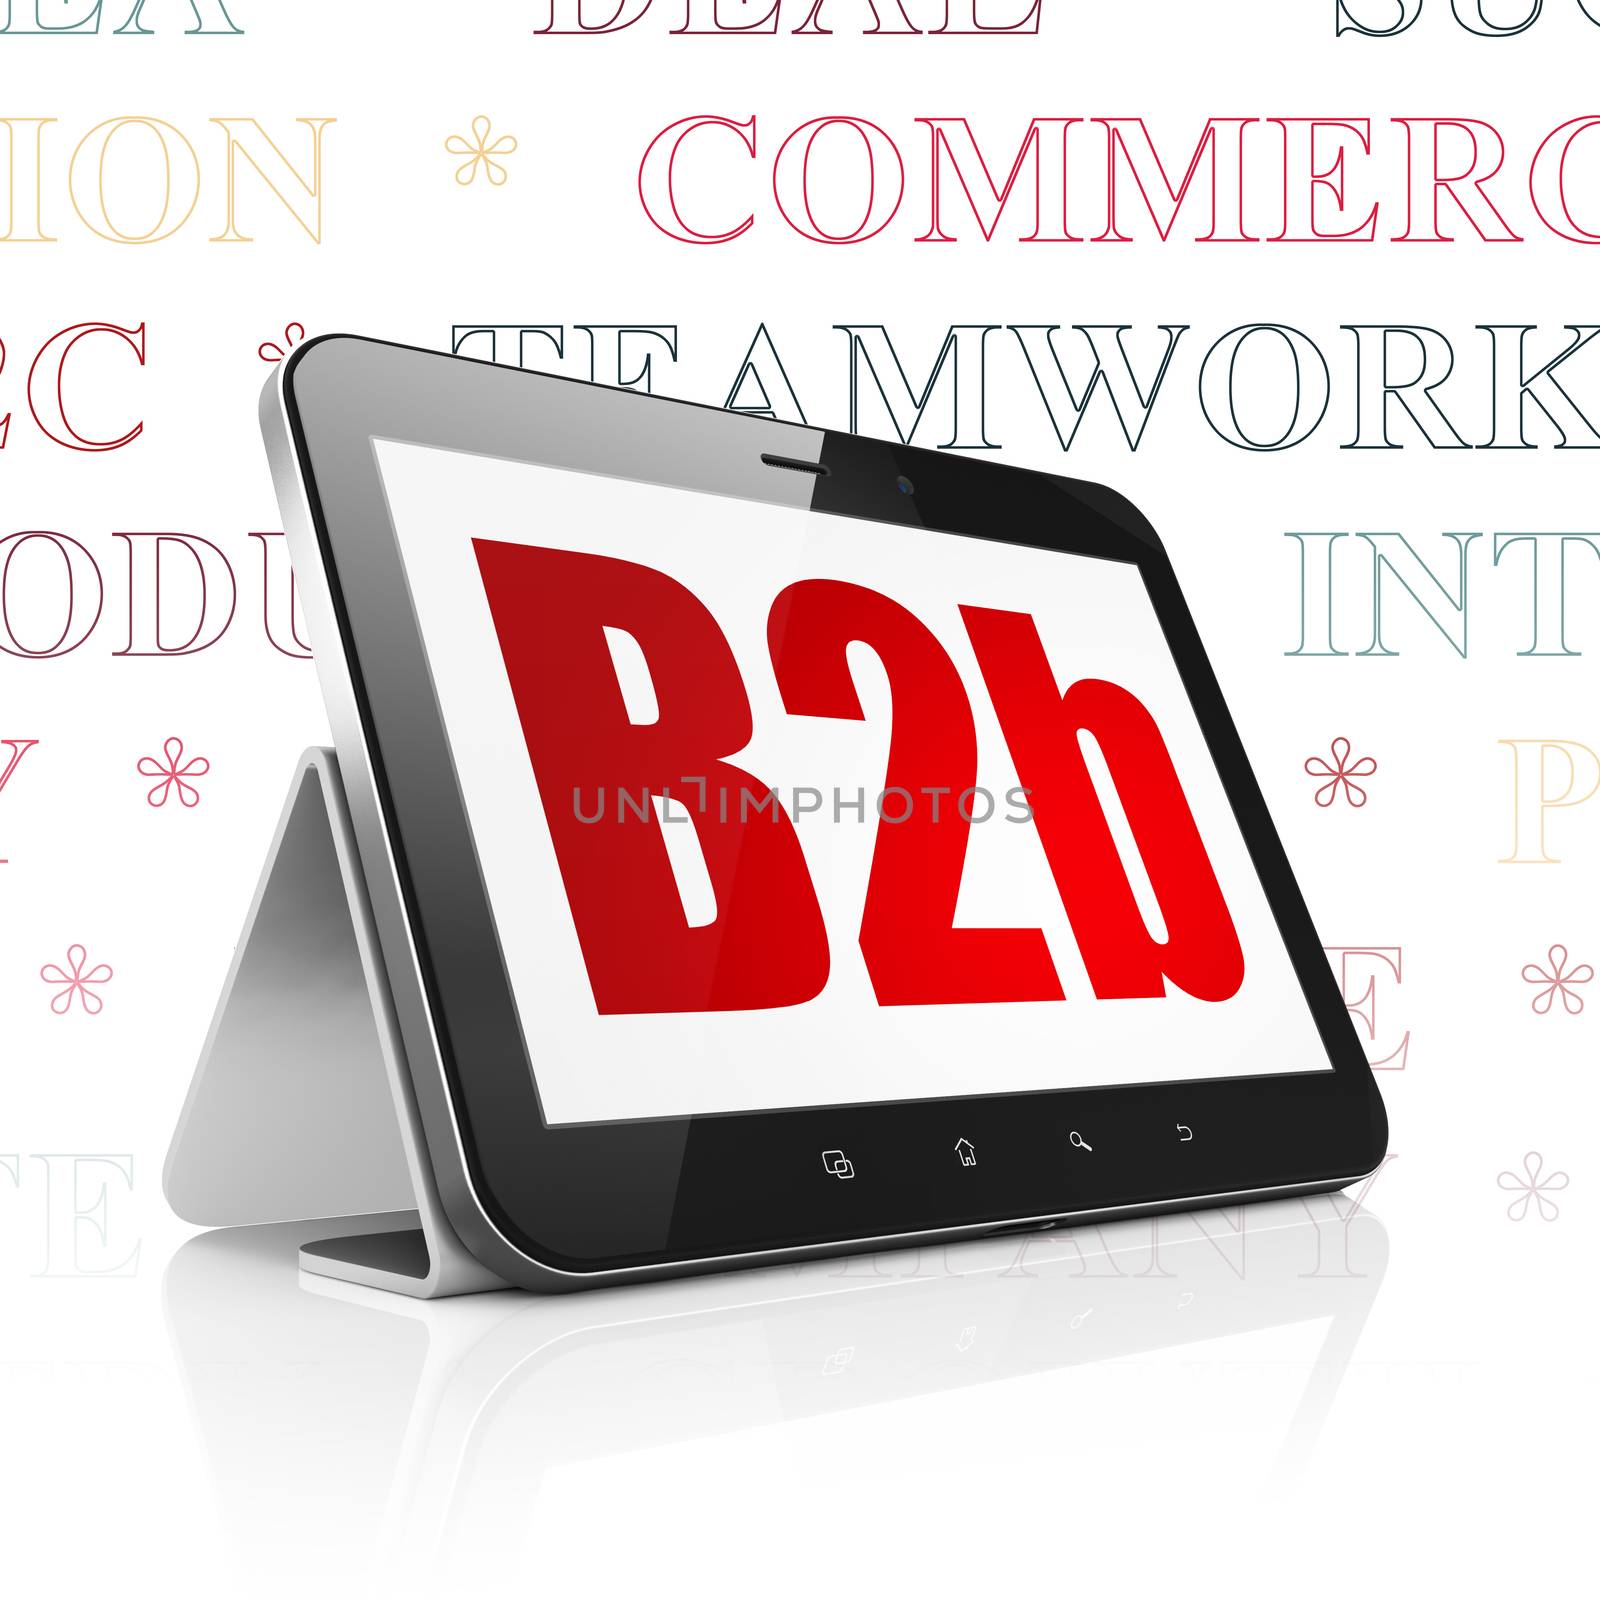 Business concept: Tablet Computer with  red text B2b on display,  Tag Cloud background, 3D rendering